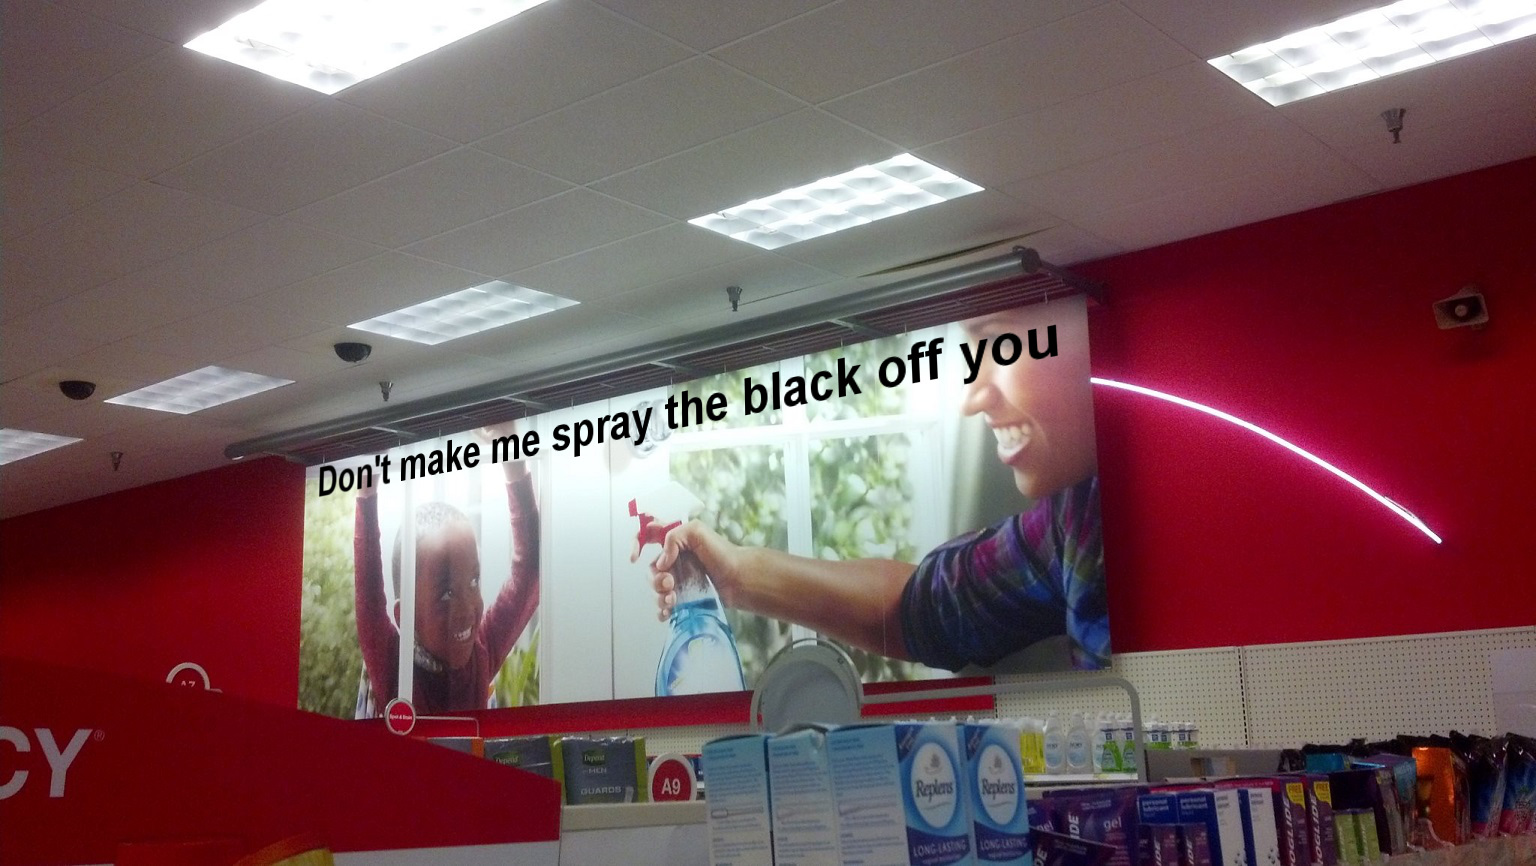 Don't make me spray the black off you